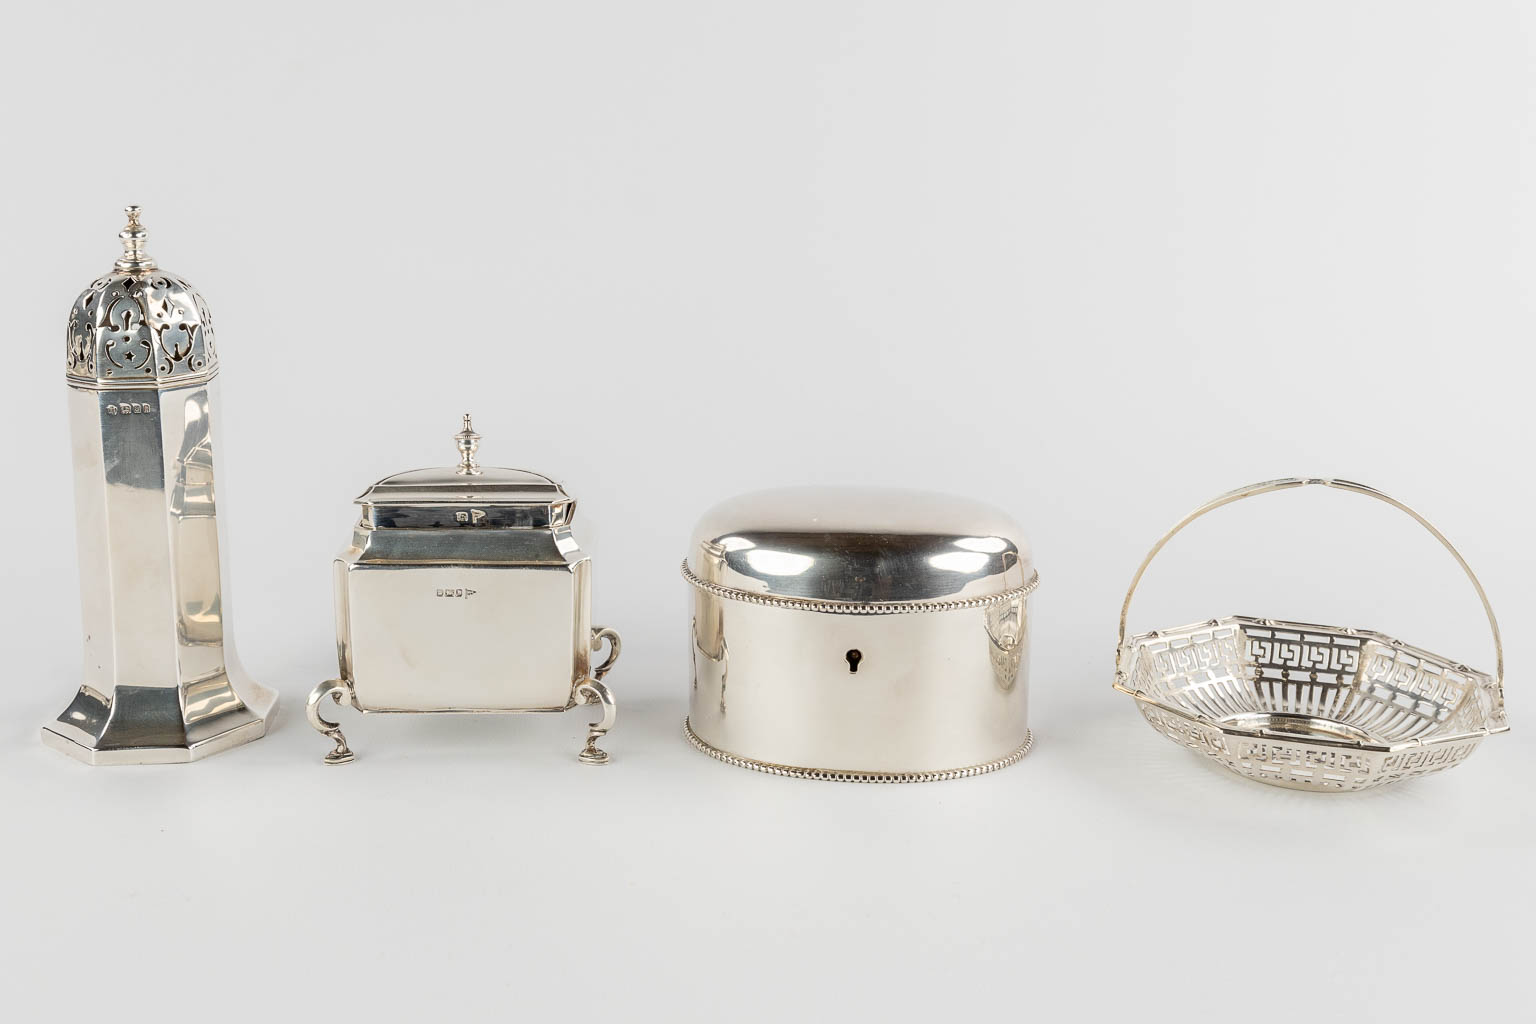 Large collection of silver items, Mostly England. 19th C. Total gross weight: 2915g. (W:22 x H:14 cm)